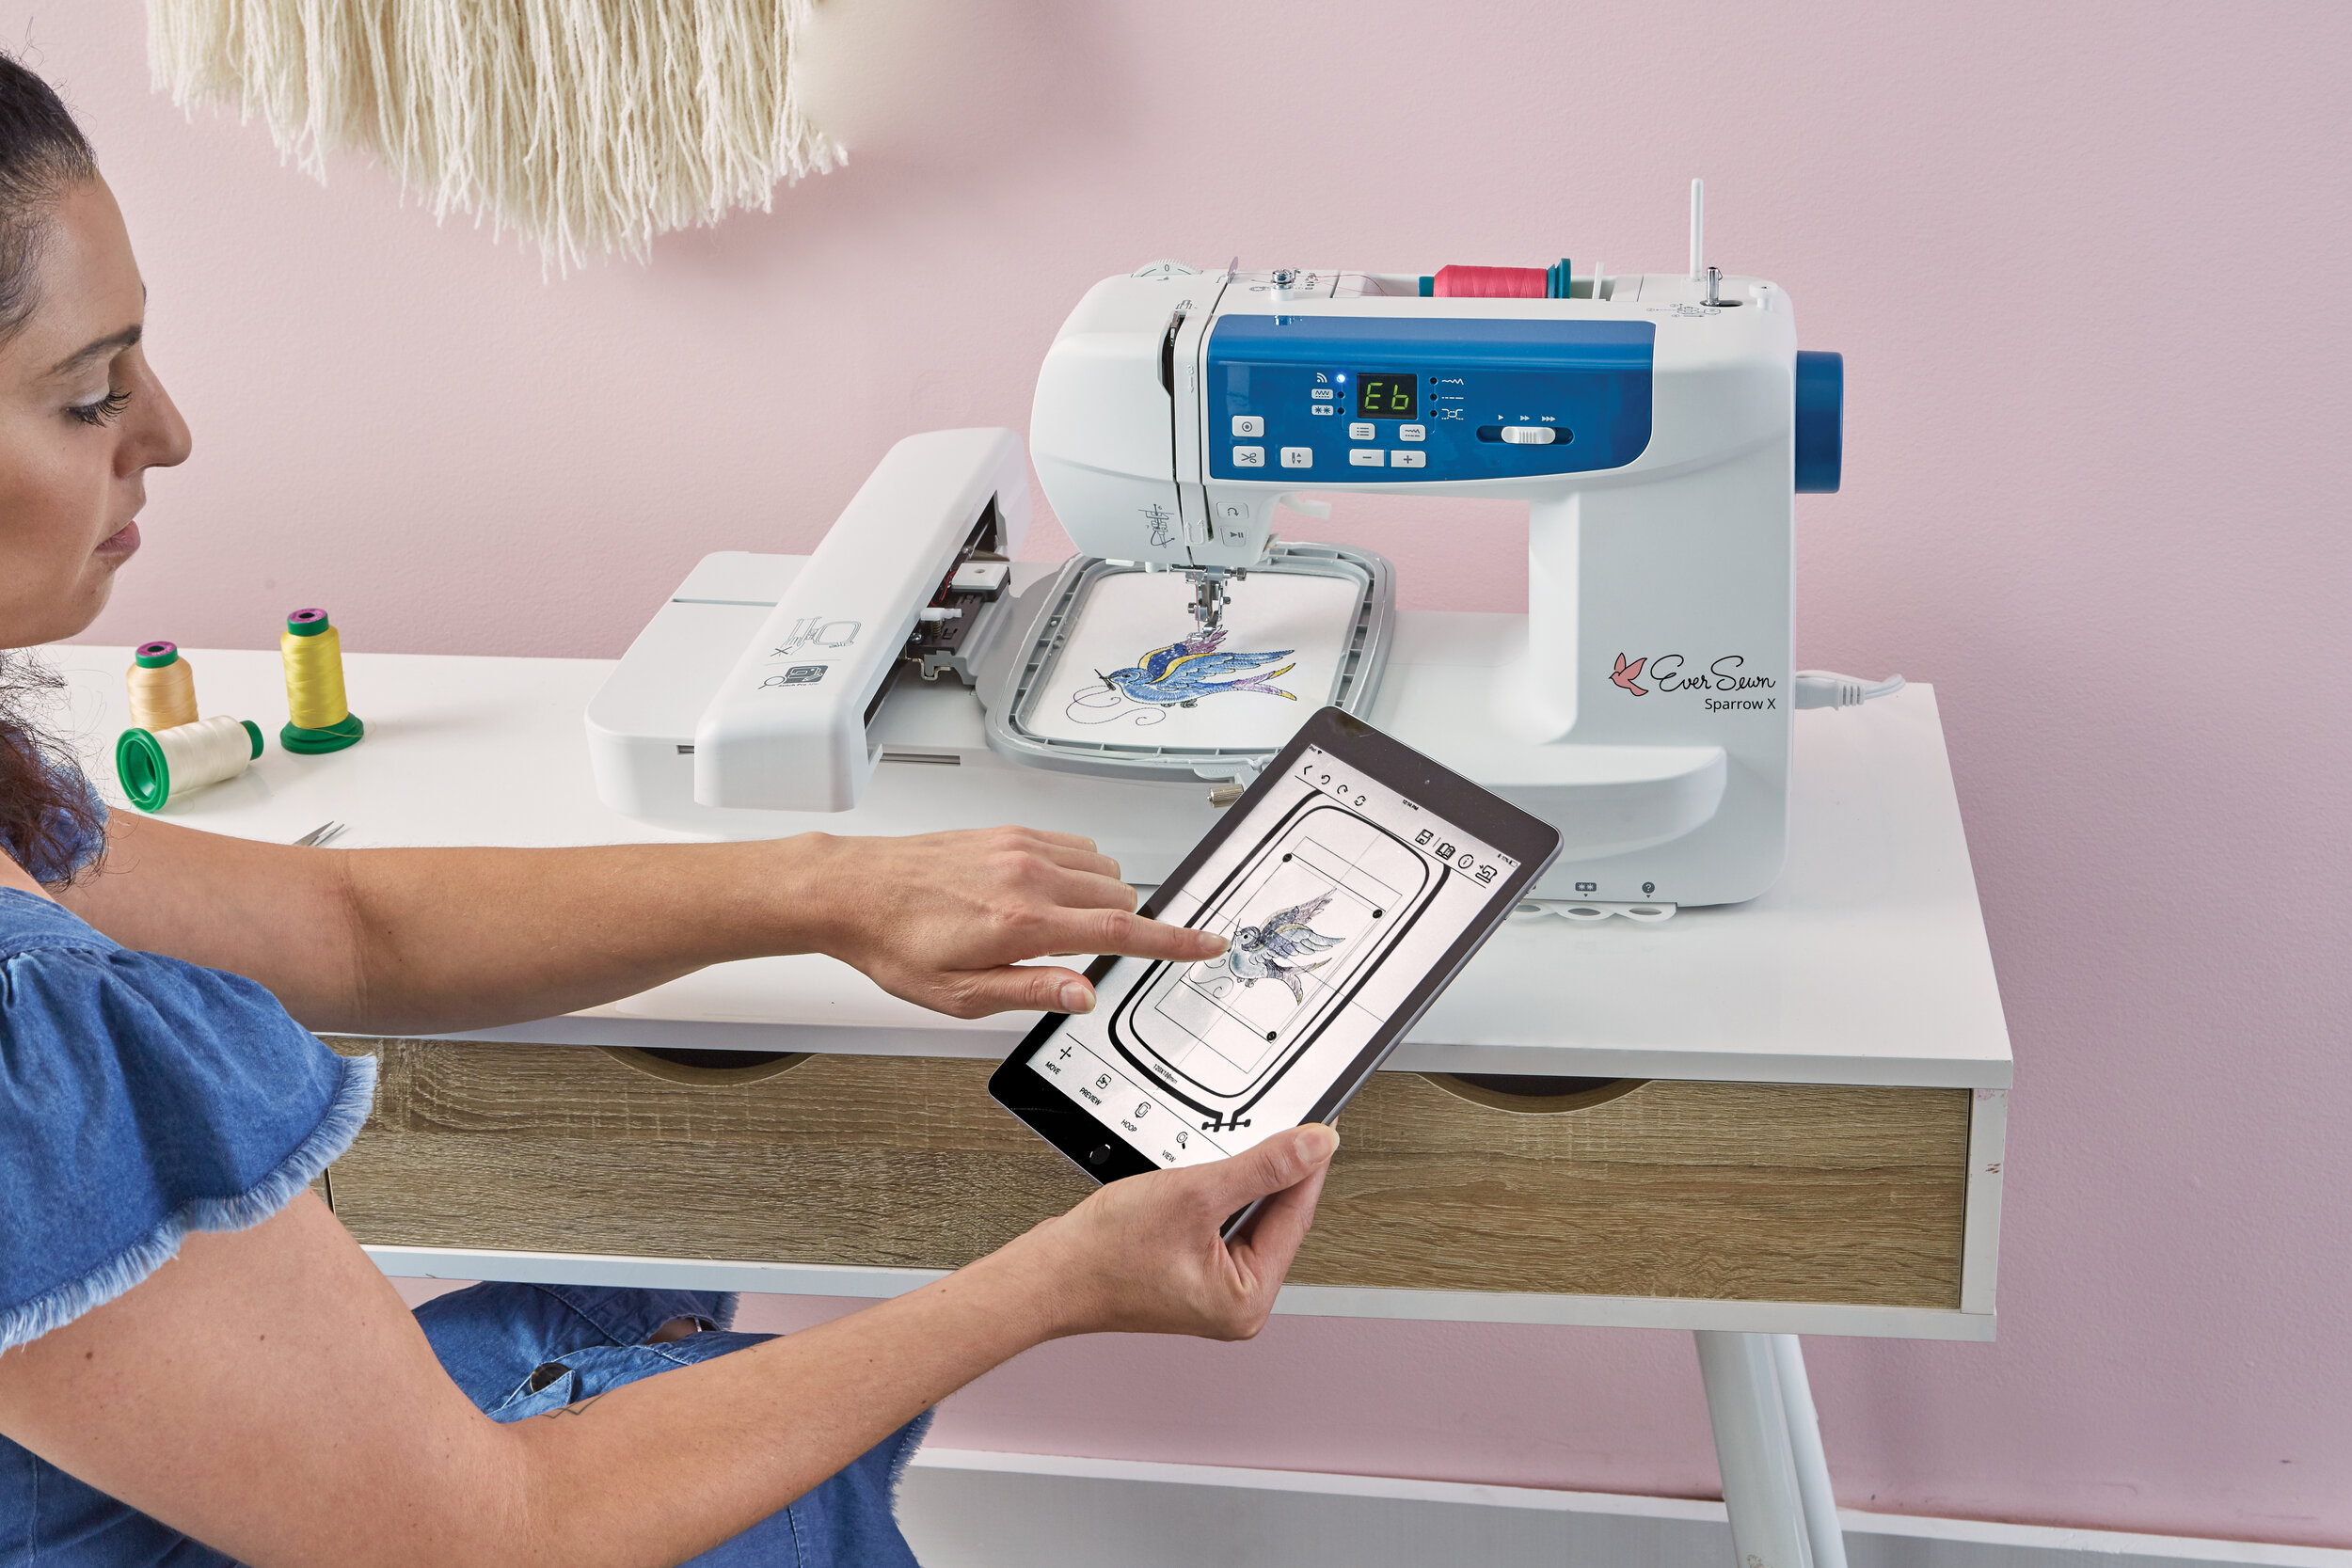 Sparrow X Sewing and Embroidery Machine — EverSewn